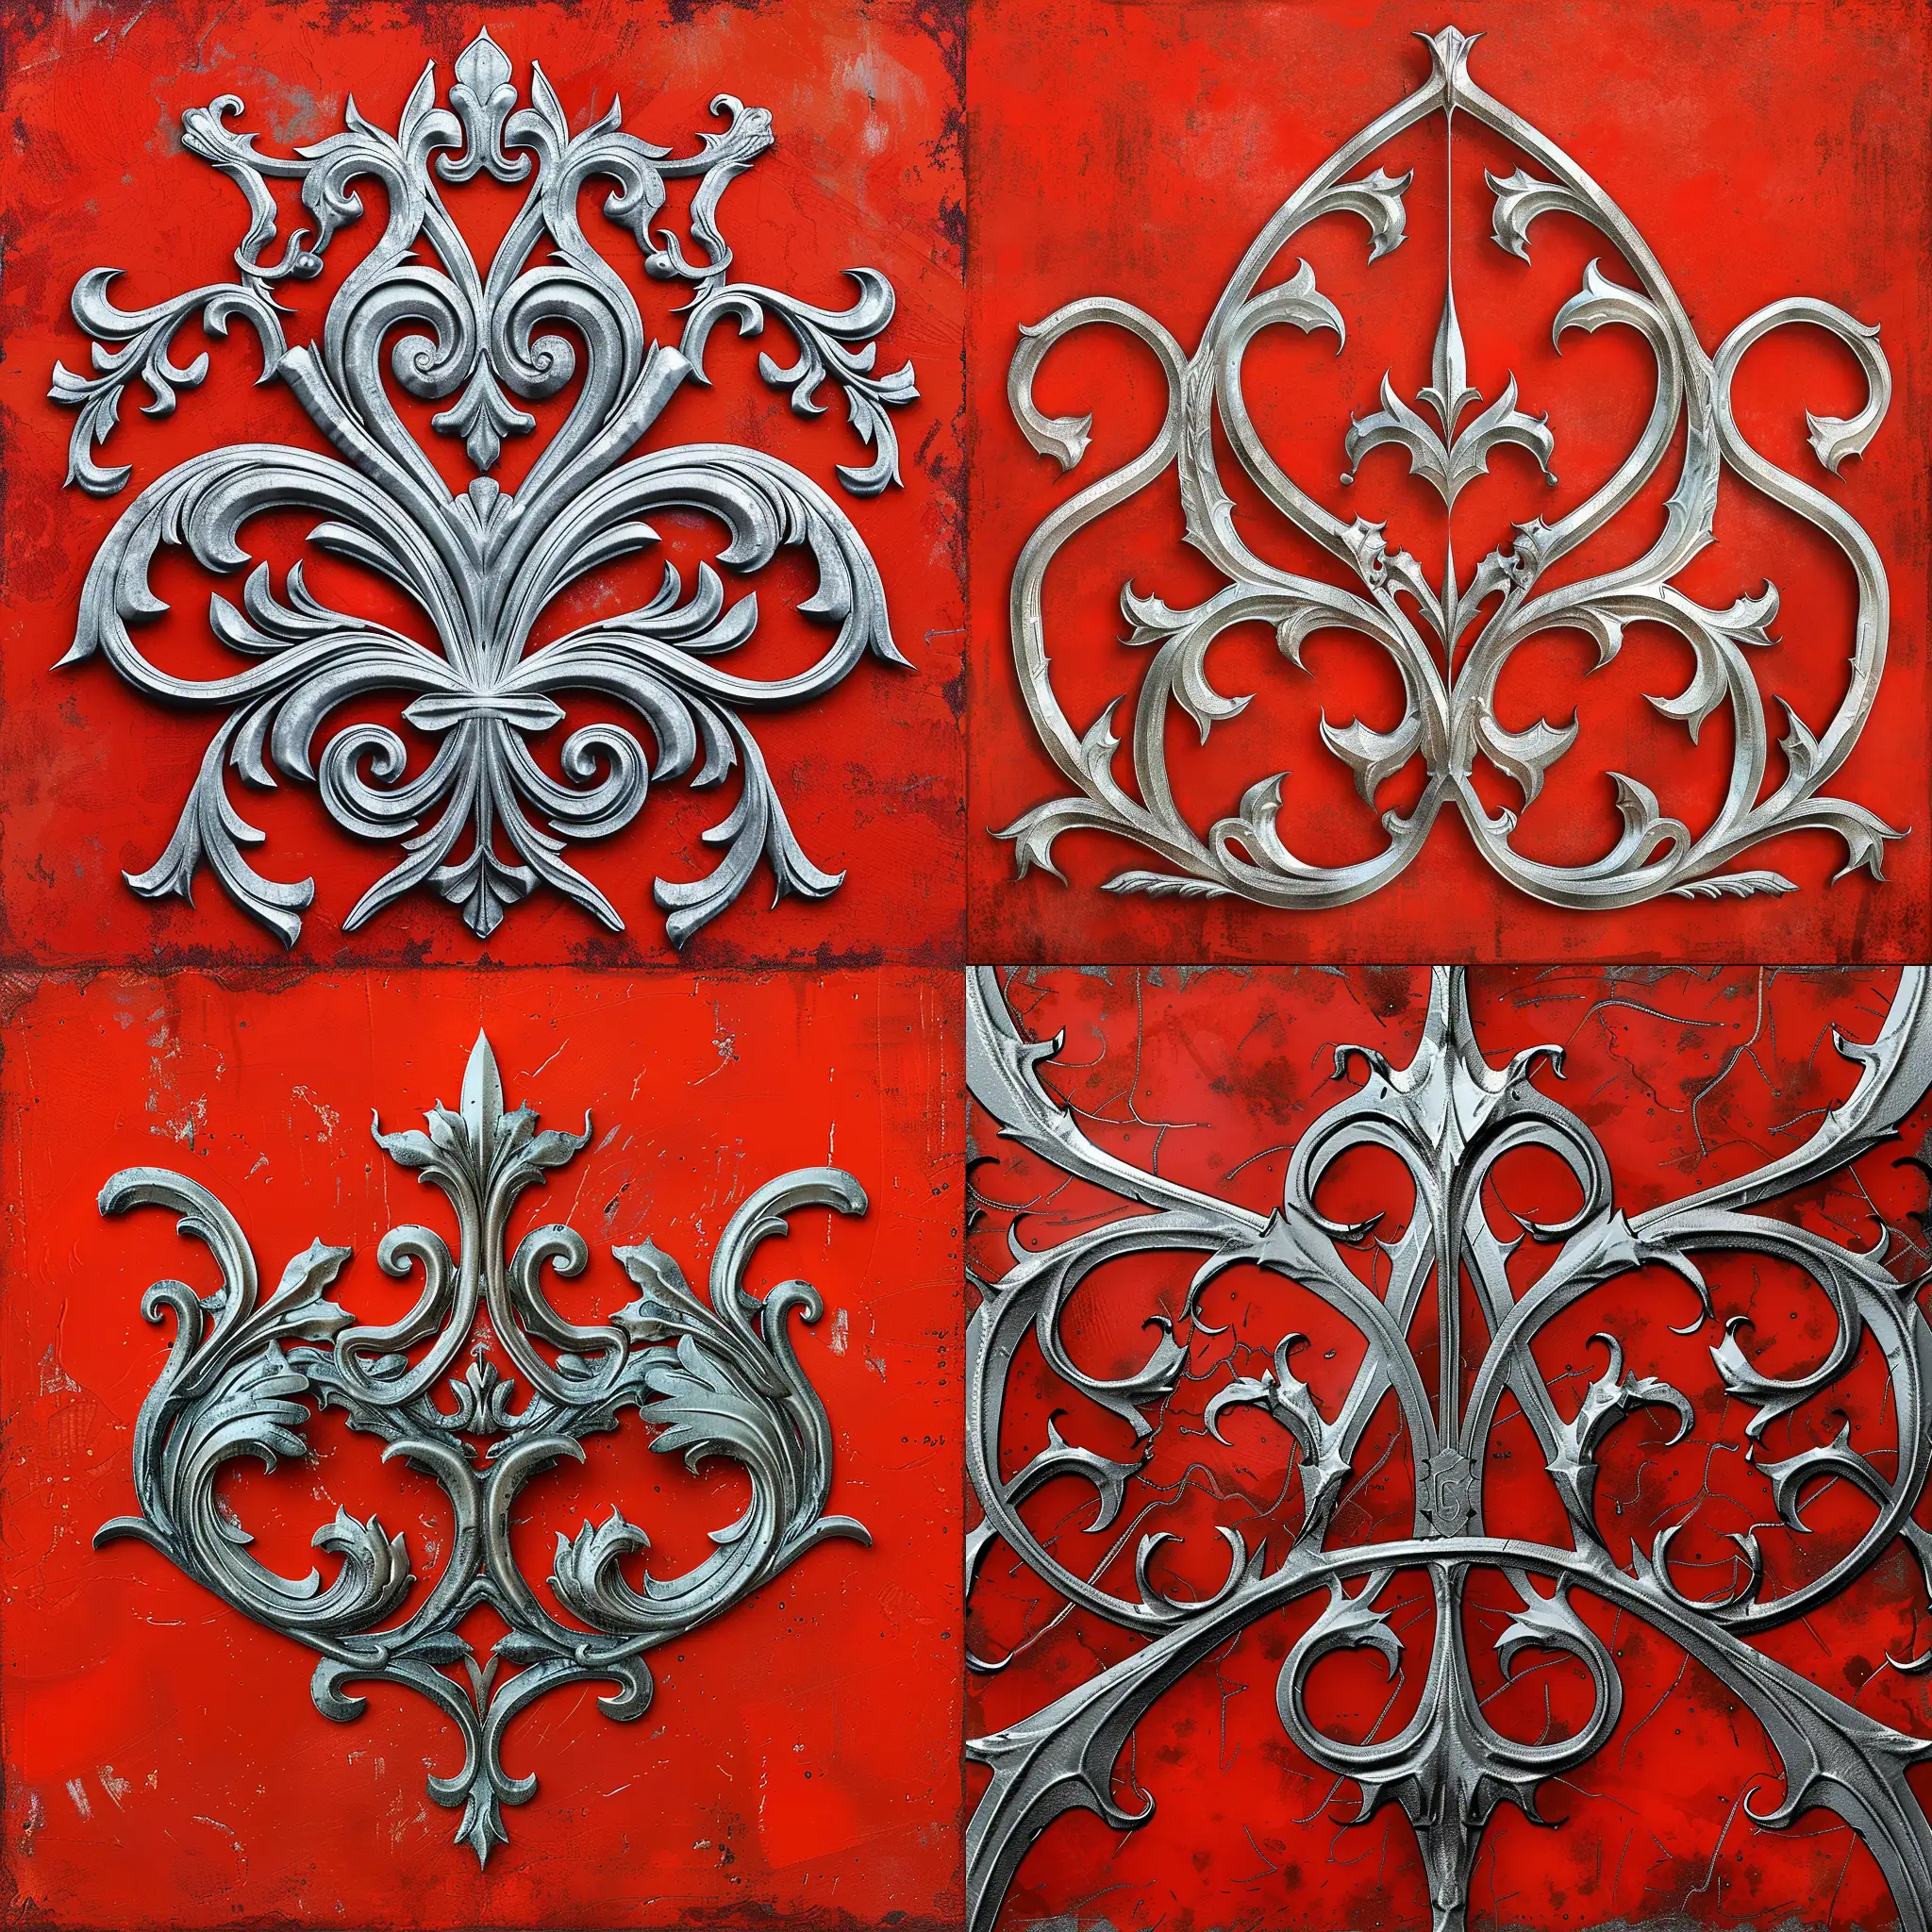 Silver-Gothic-Filigree-on-Bright-Red-Background-Intricate-Digital-Painting